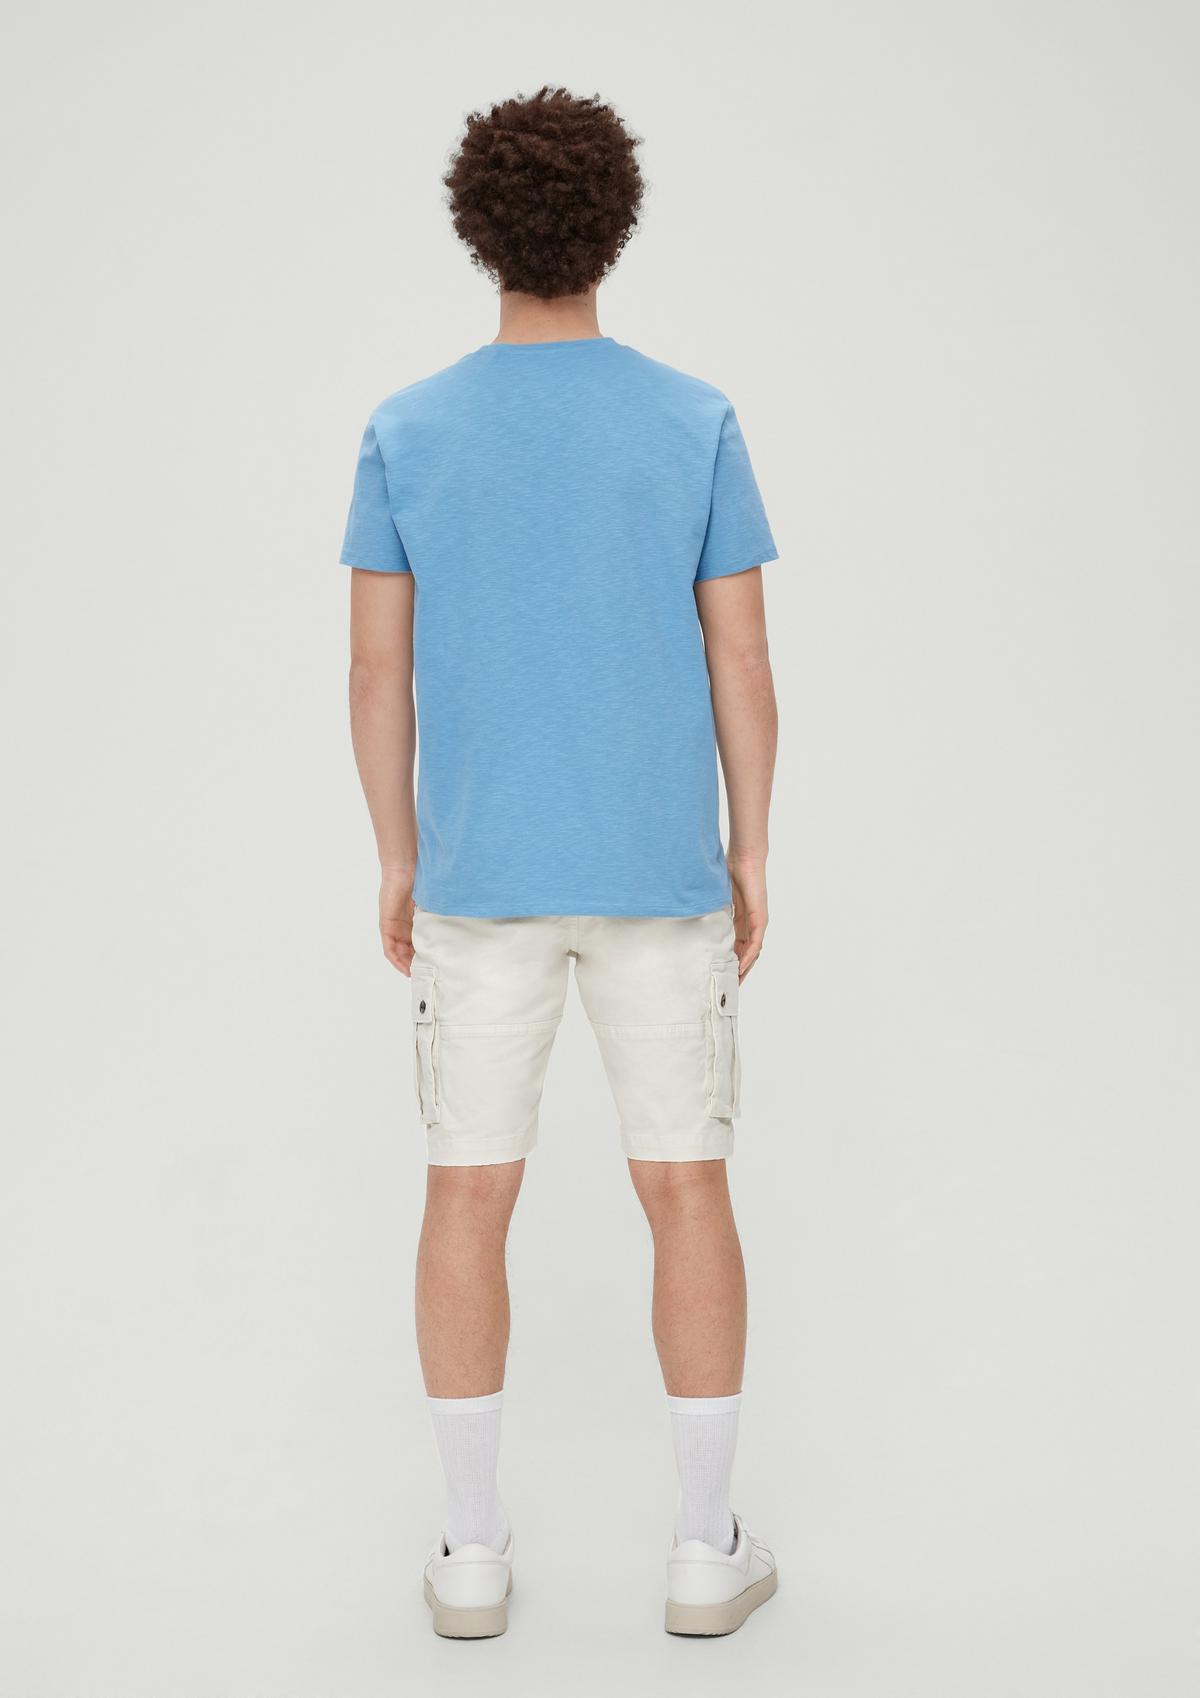 s.Oliver T-shirt made of pure cotton